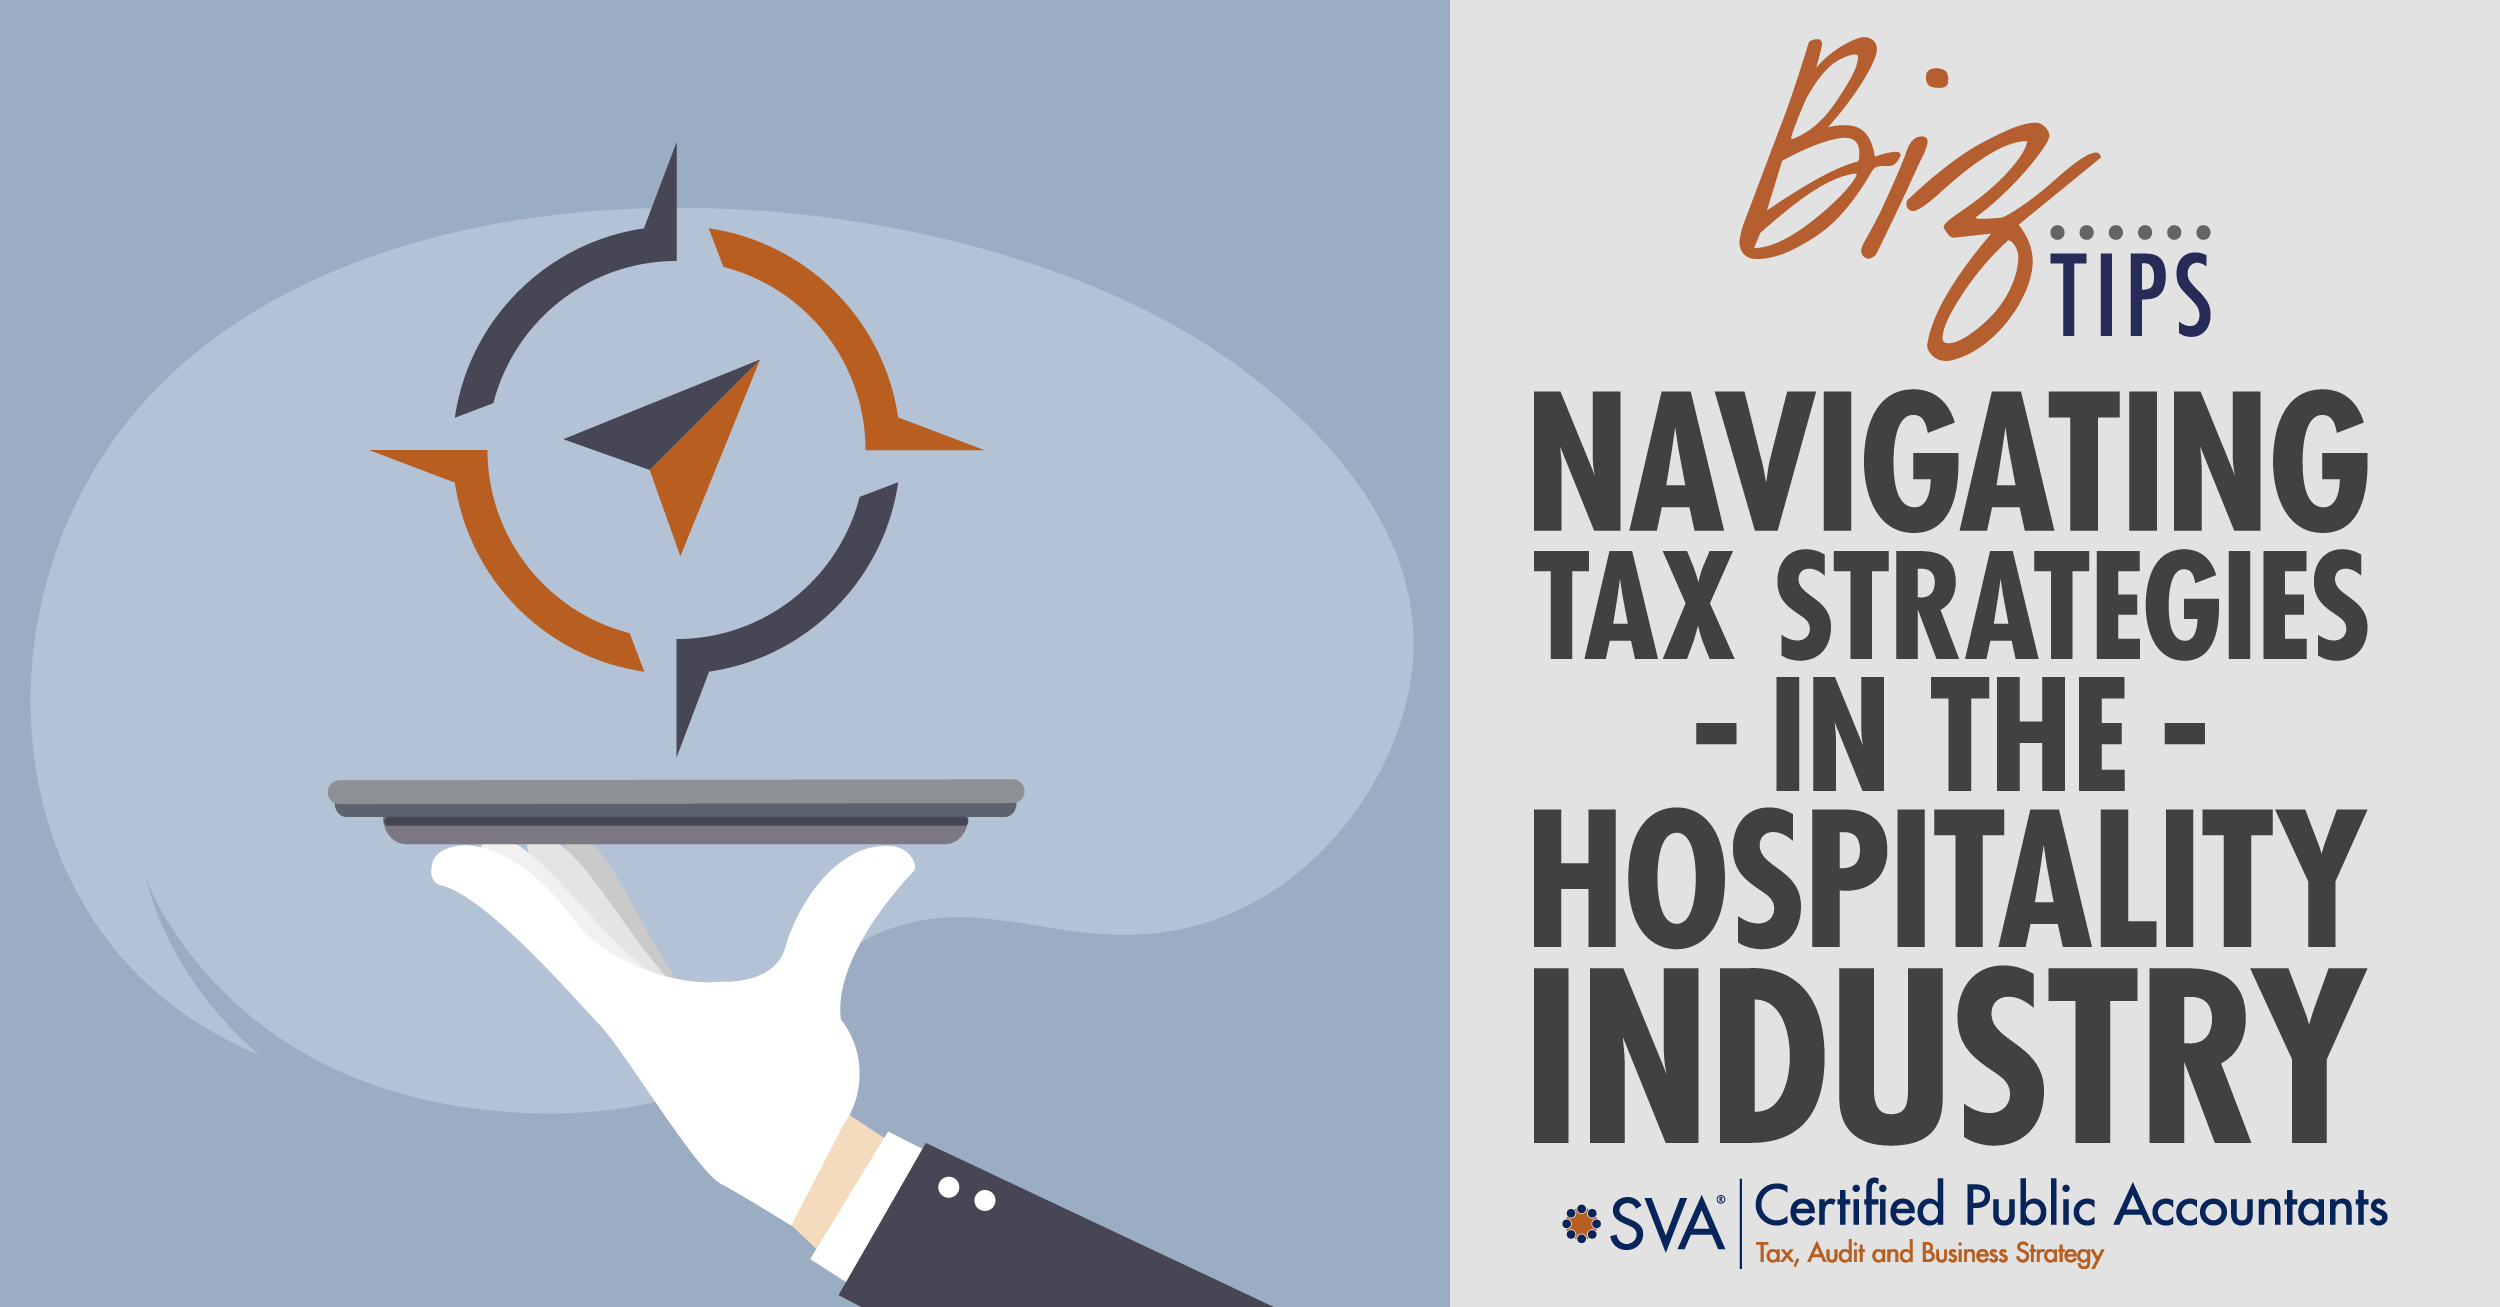 Navigating Tax Strategies in the Hospitality Industry